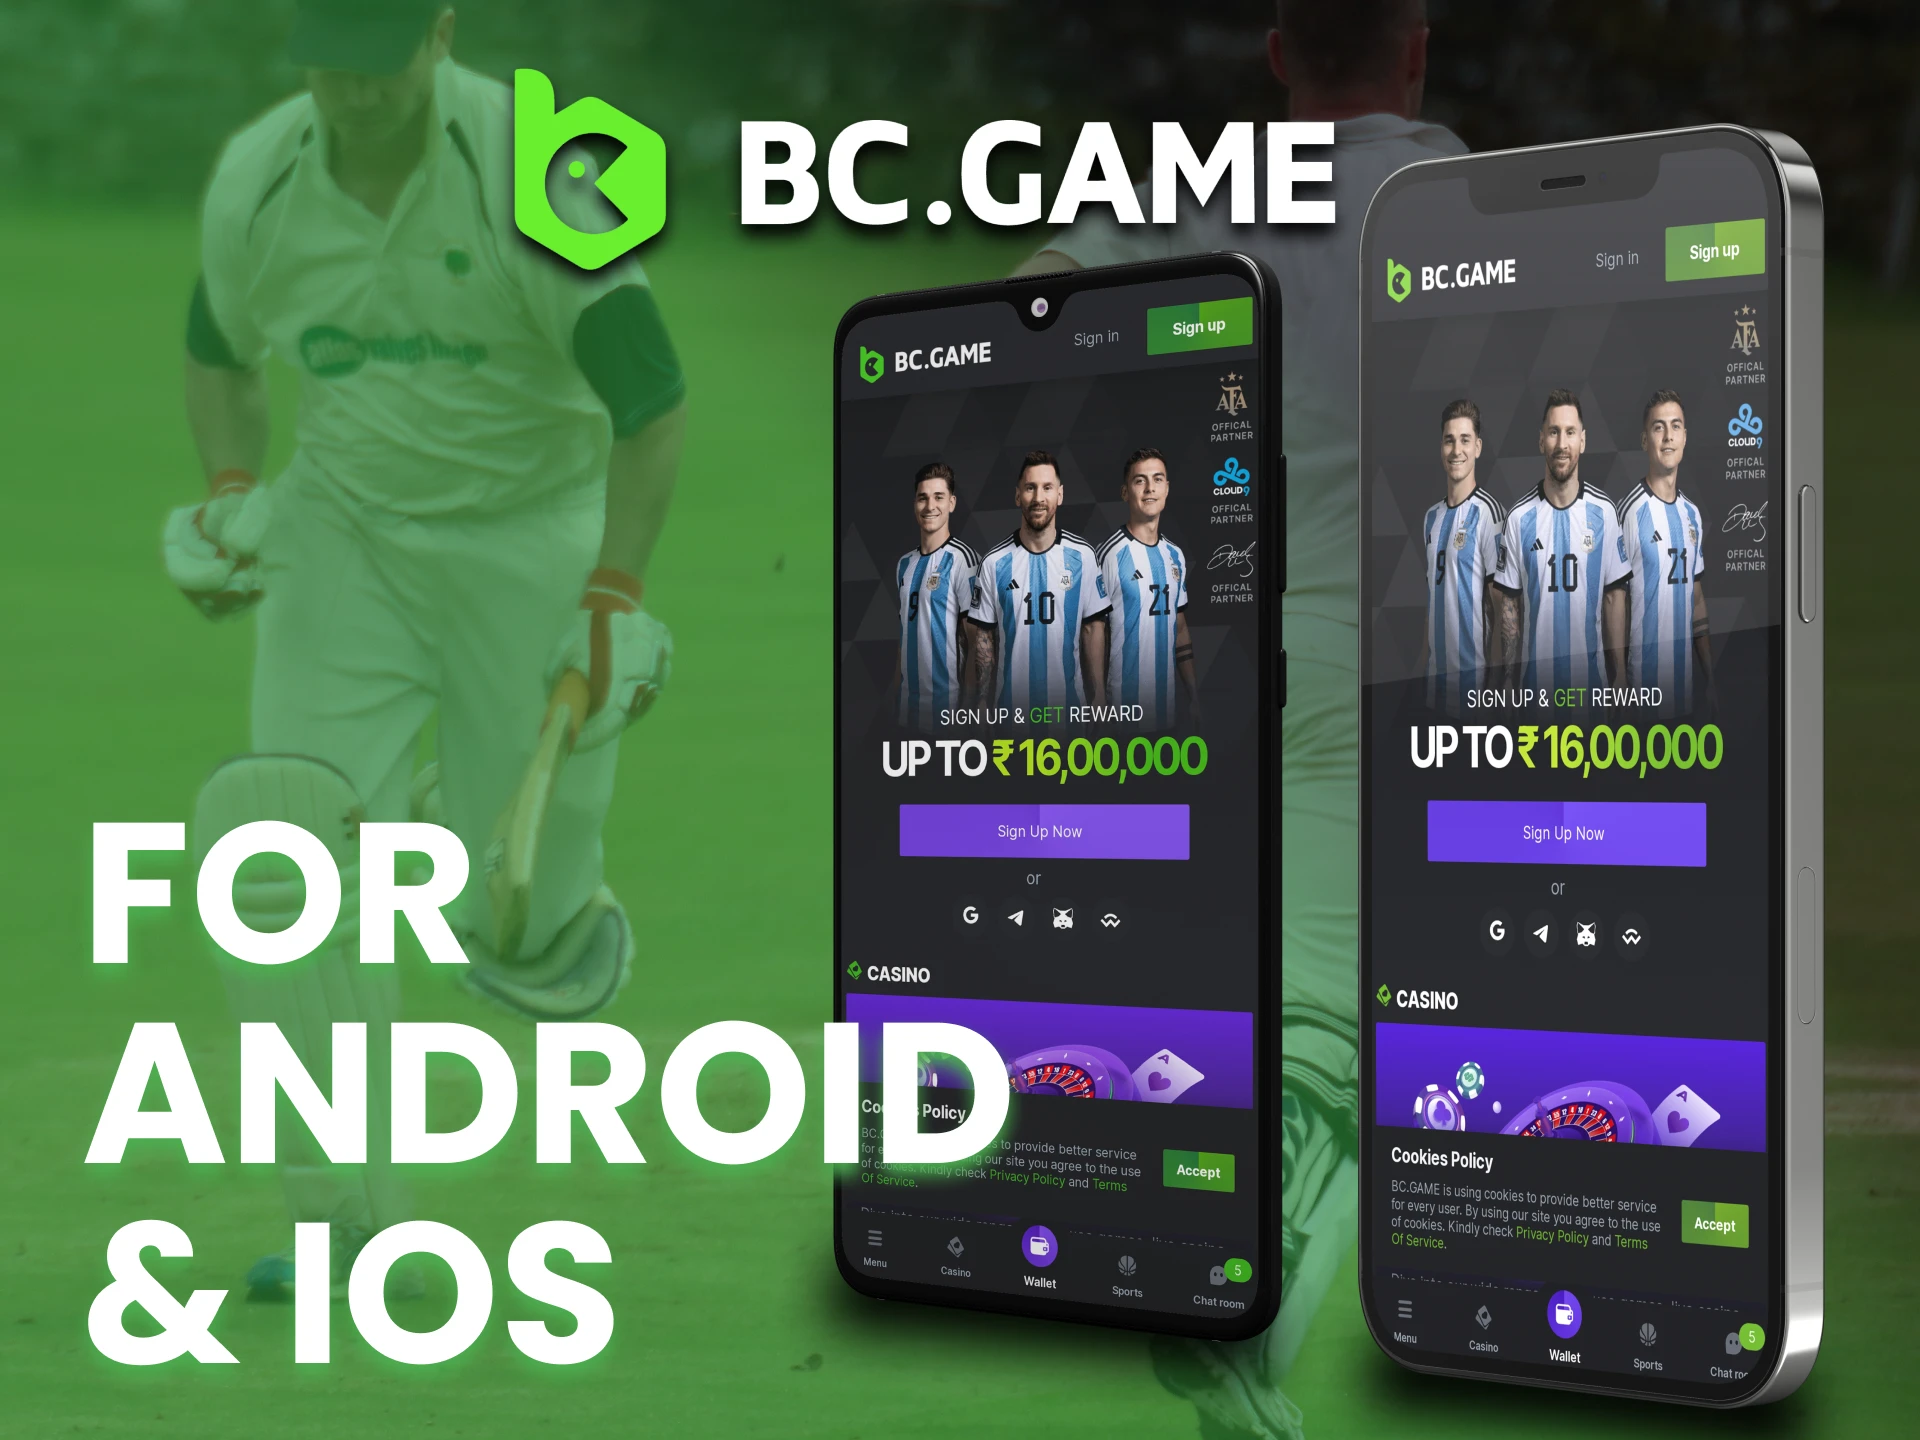 You can download and install BC Game app on Android and iOS devices.